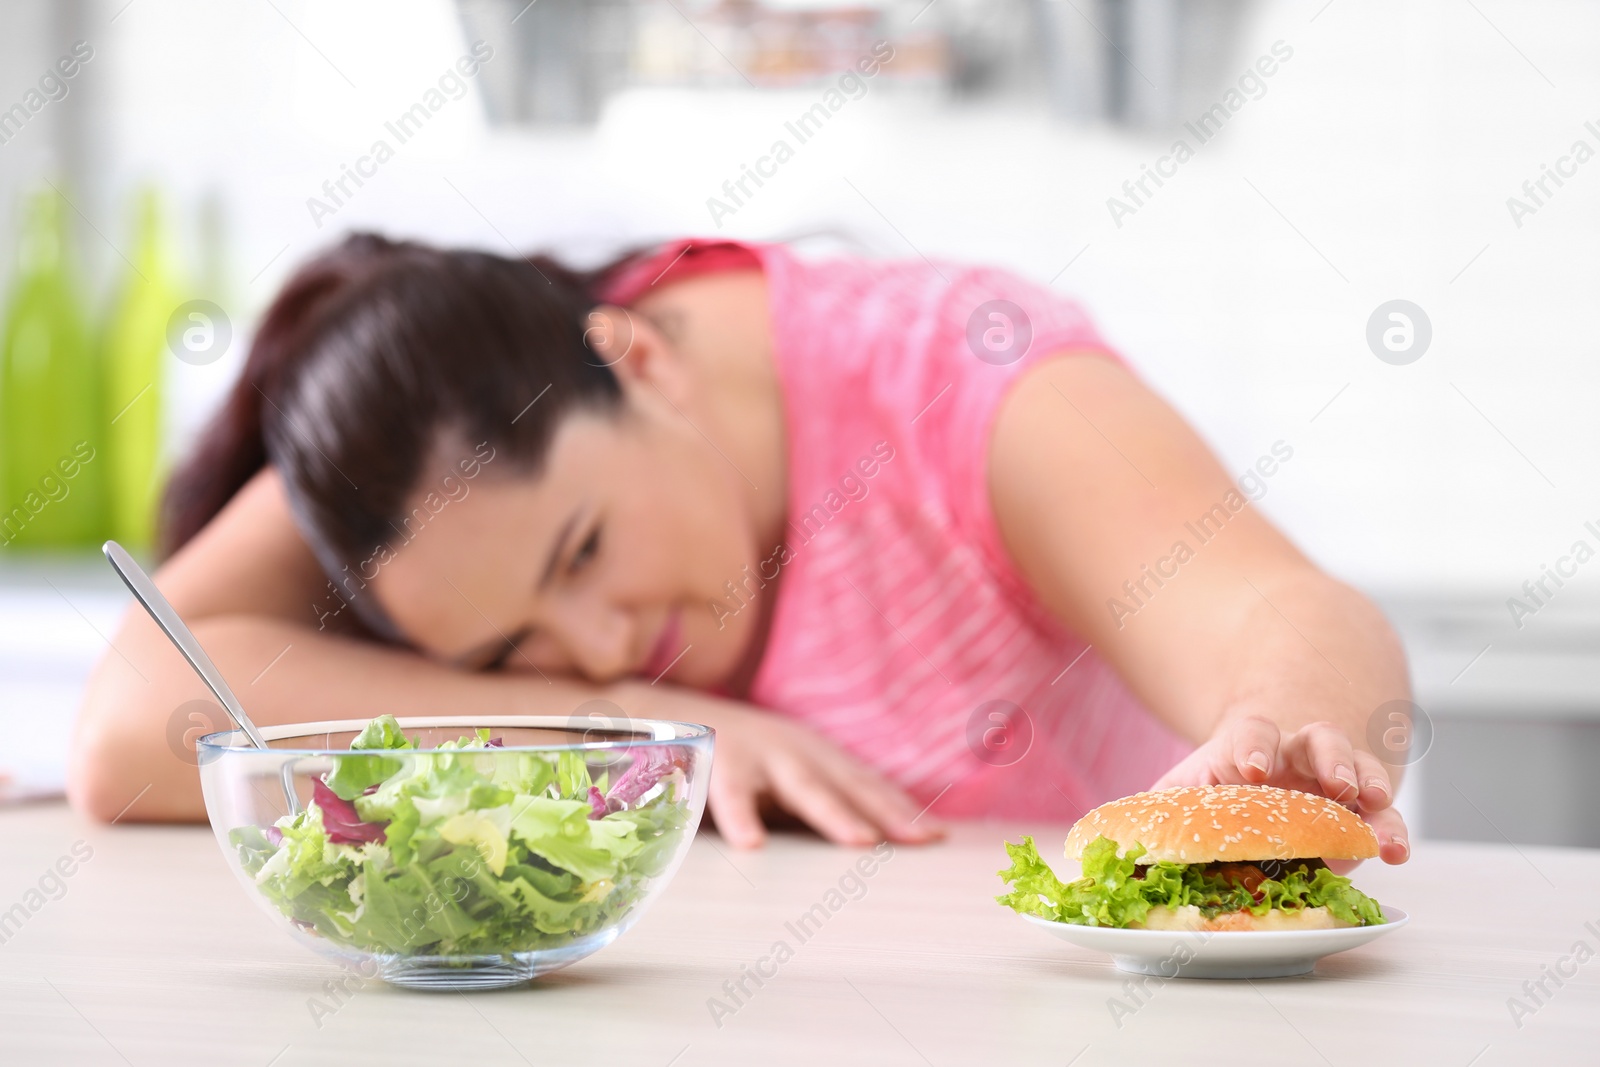 Photo of Salad and burger with blurred overweight woman on background. Healthy diet